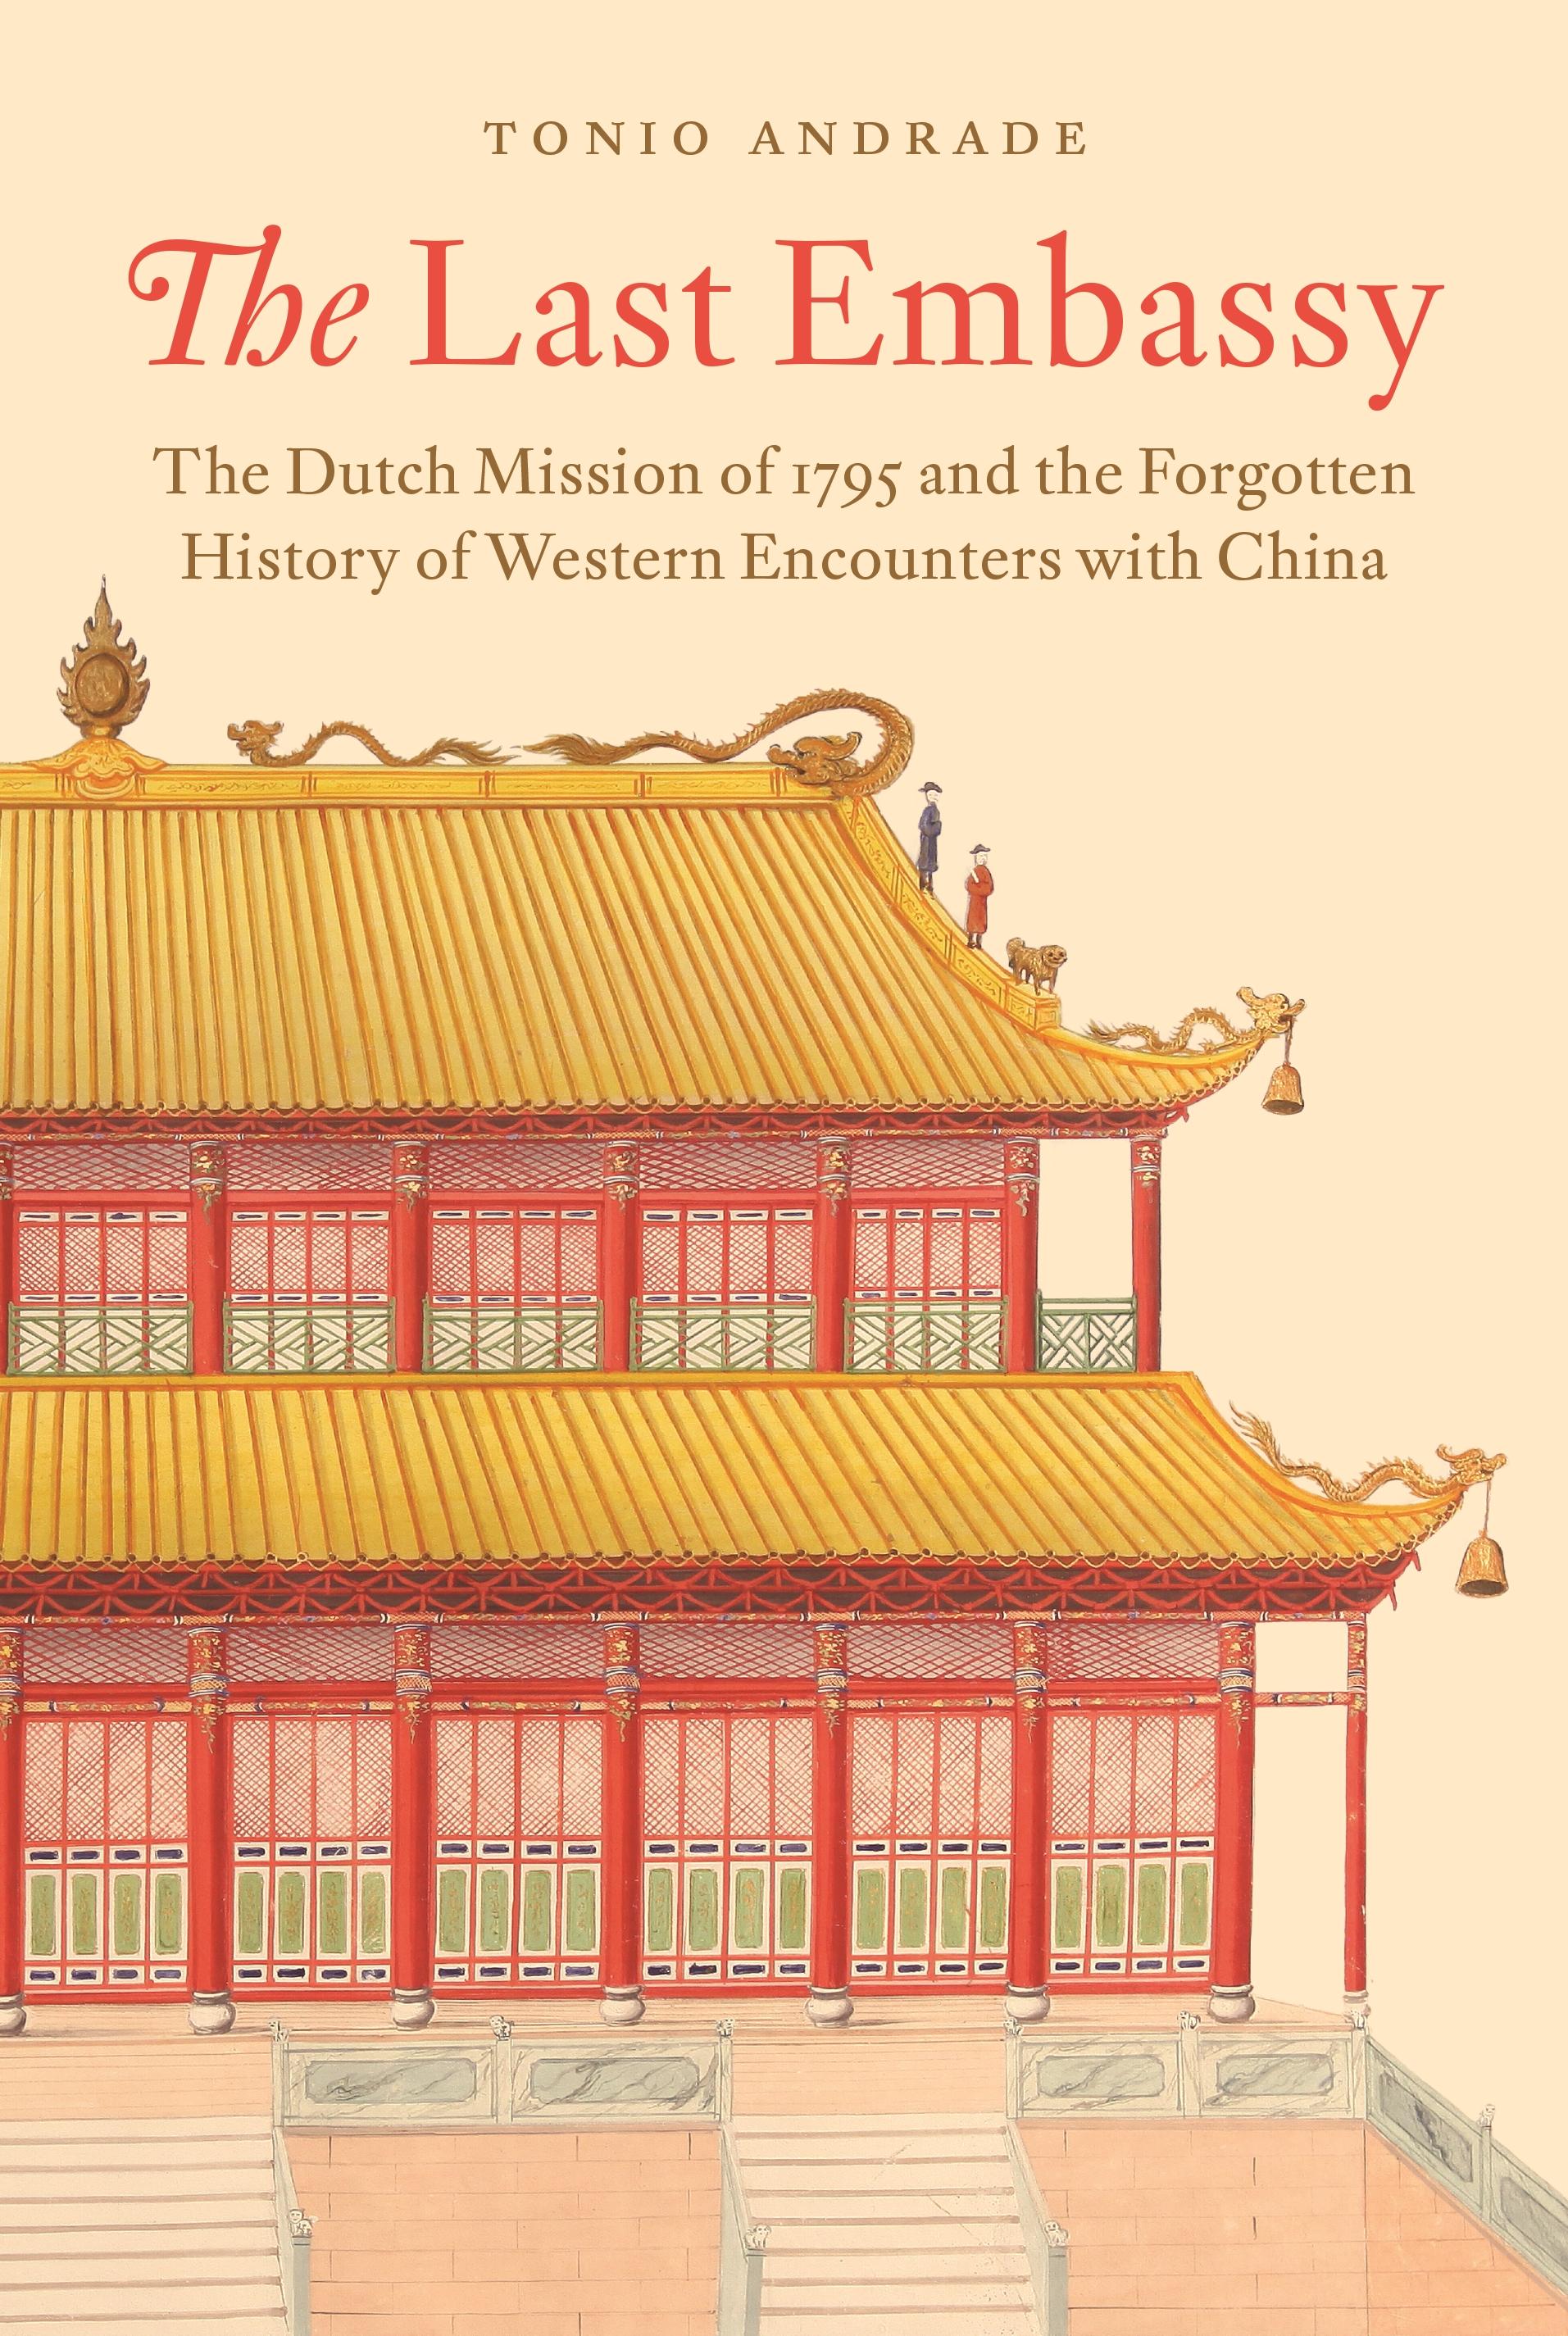 The Last Embassy / The Dutch Mission of 1795 and the Forgotten History of Western Encounters with China / Tonio Andrade / Buch / Gebunden / Englisch / 2021 / Princeton University Press - Andrade, Tonio